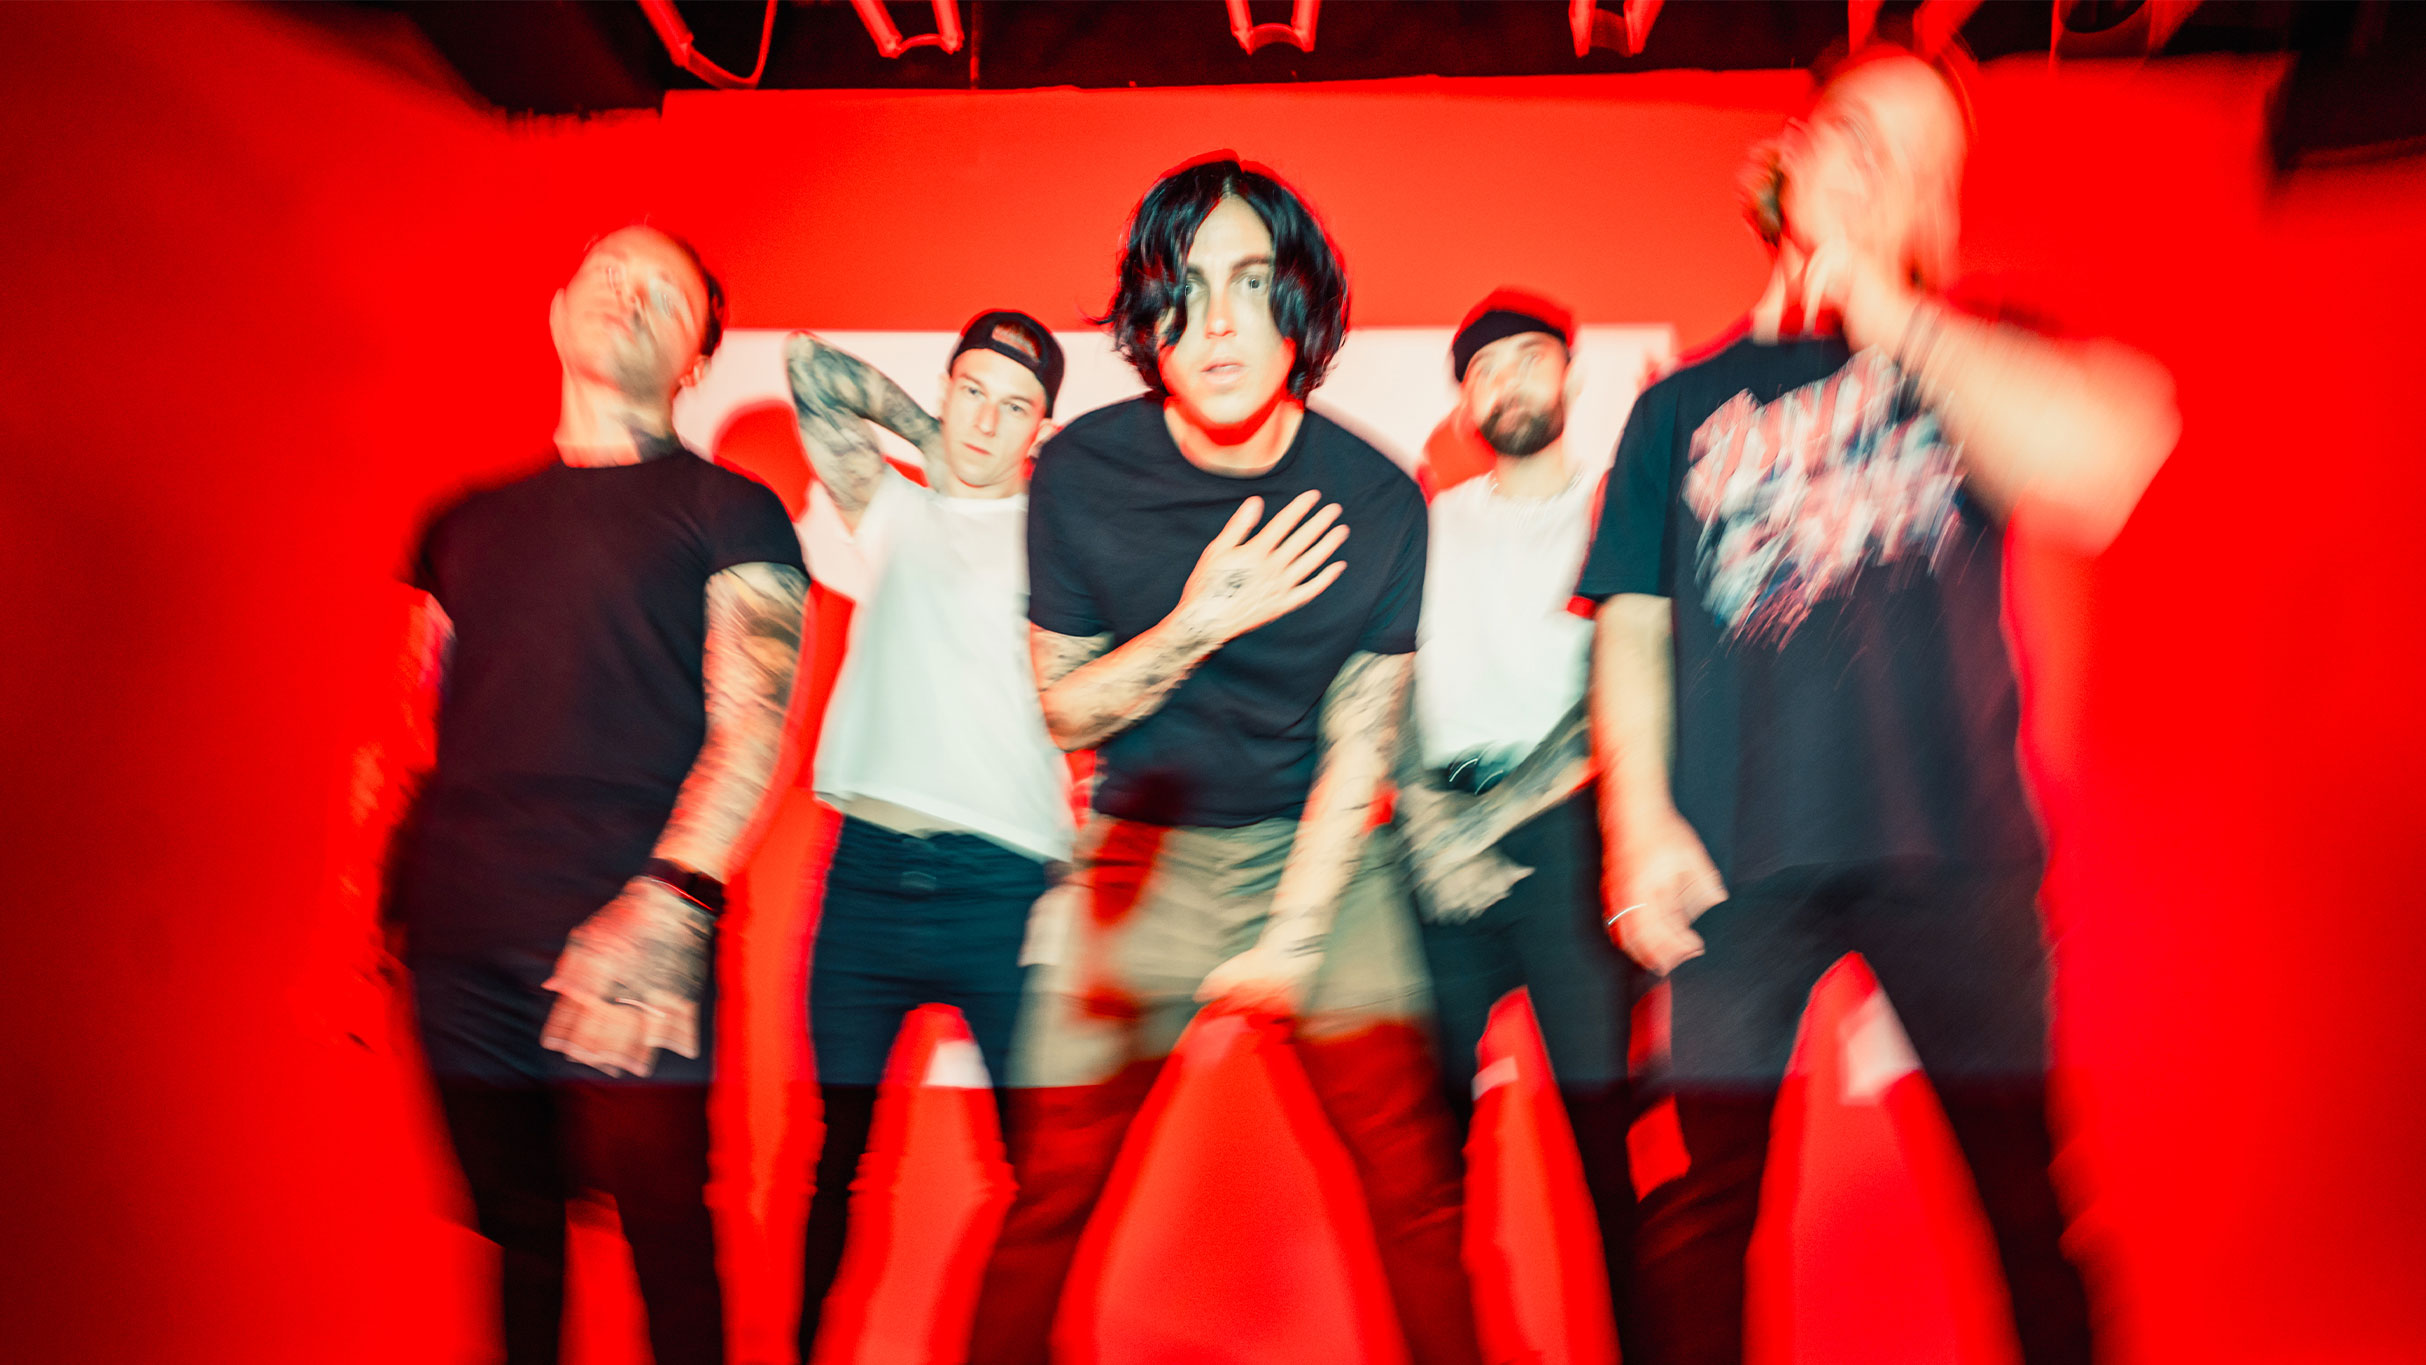 Sleeping With Sirens: Let's Cheers to This Tour presented by WJRR